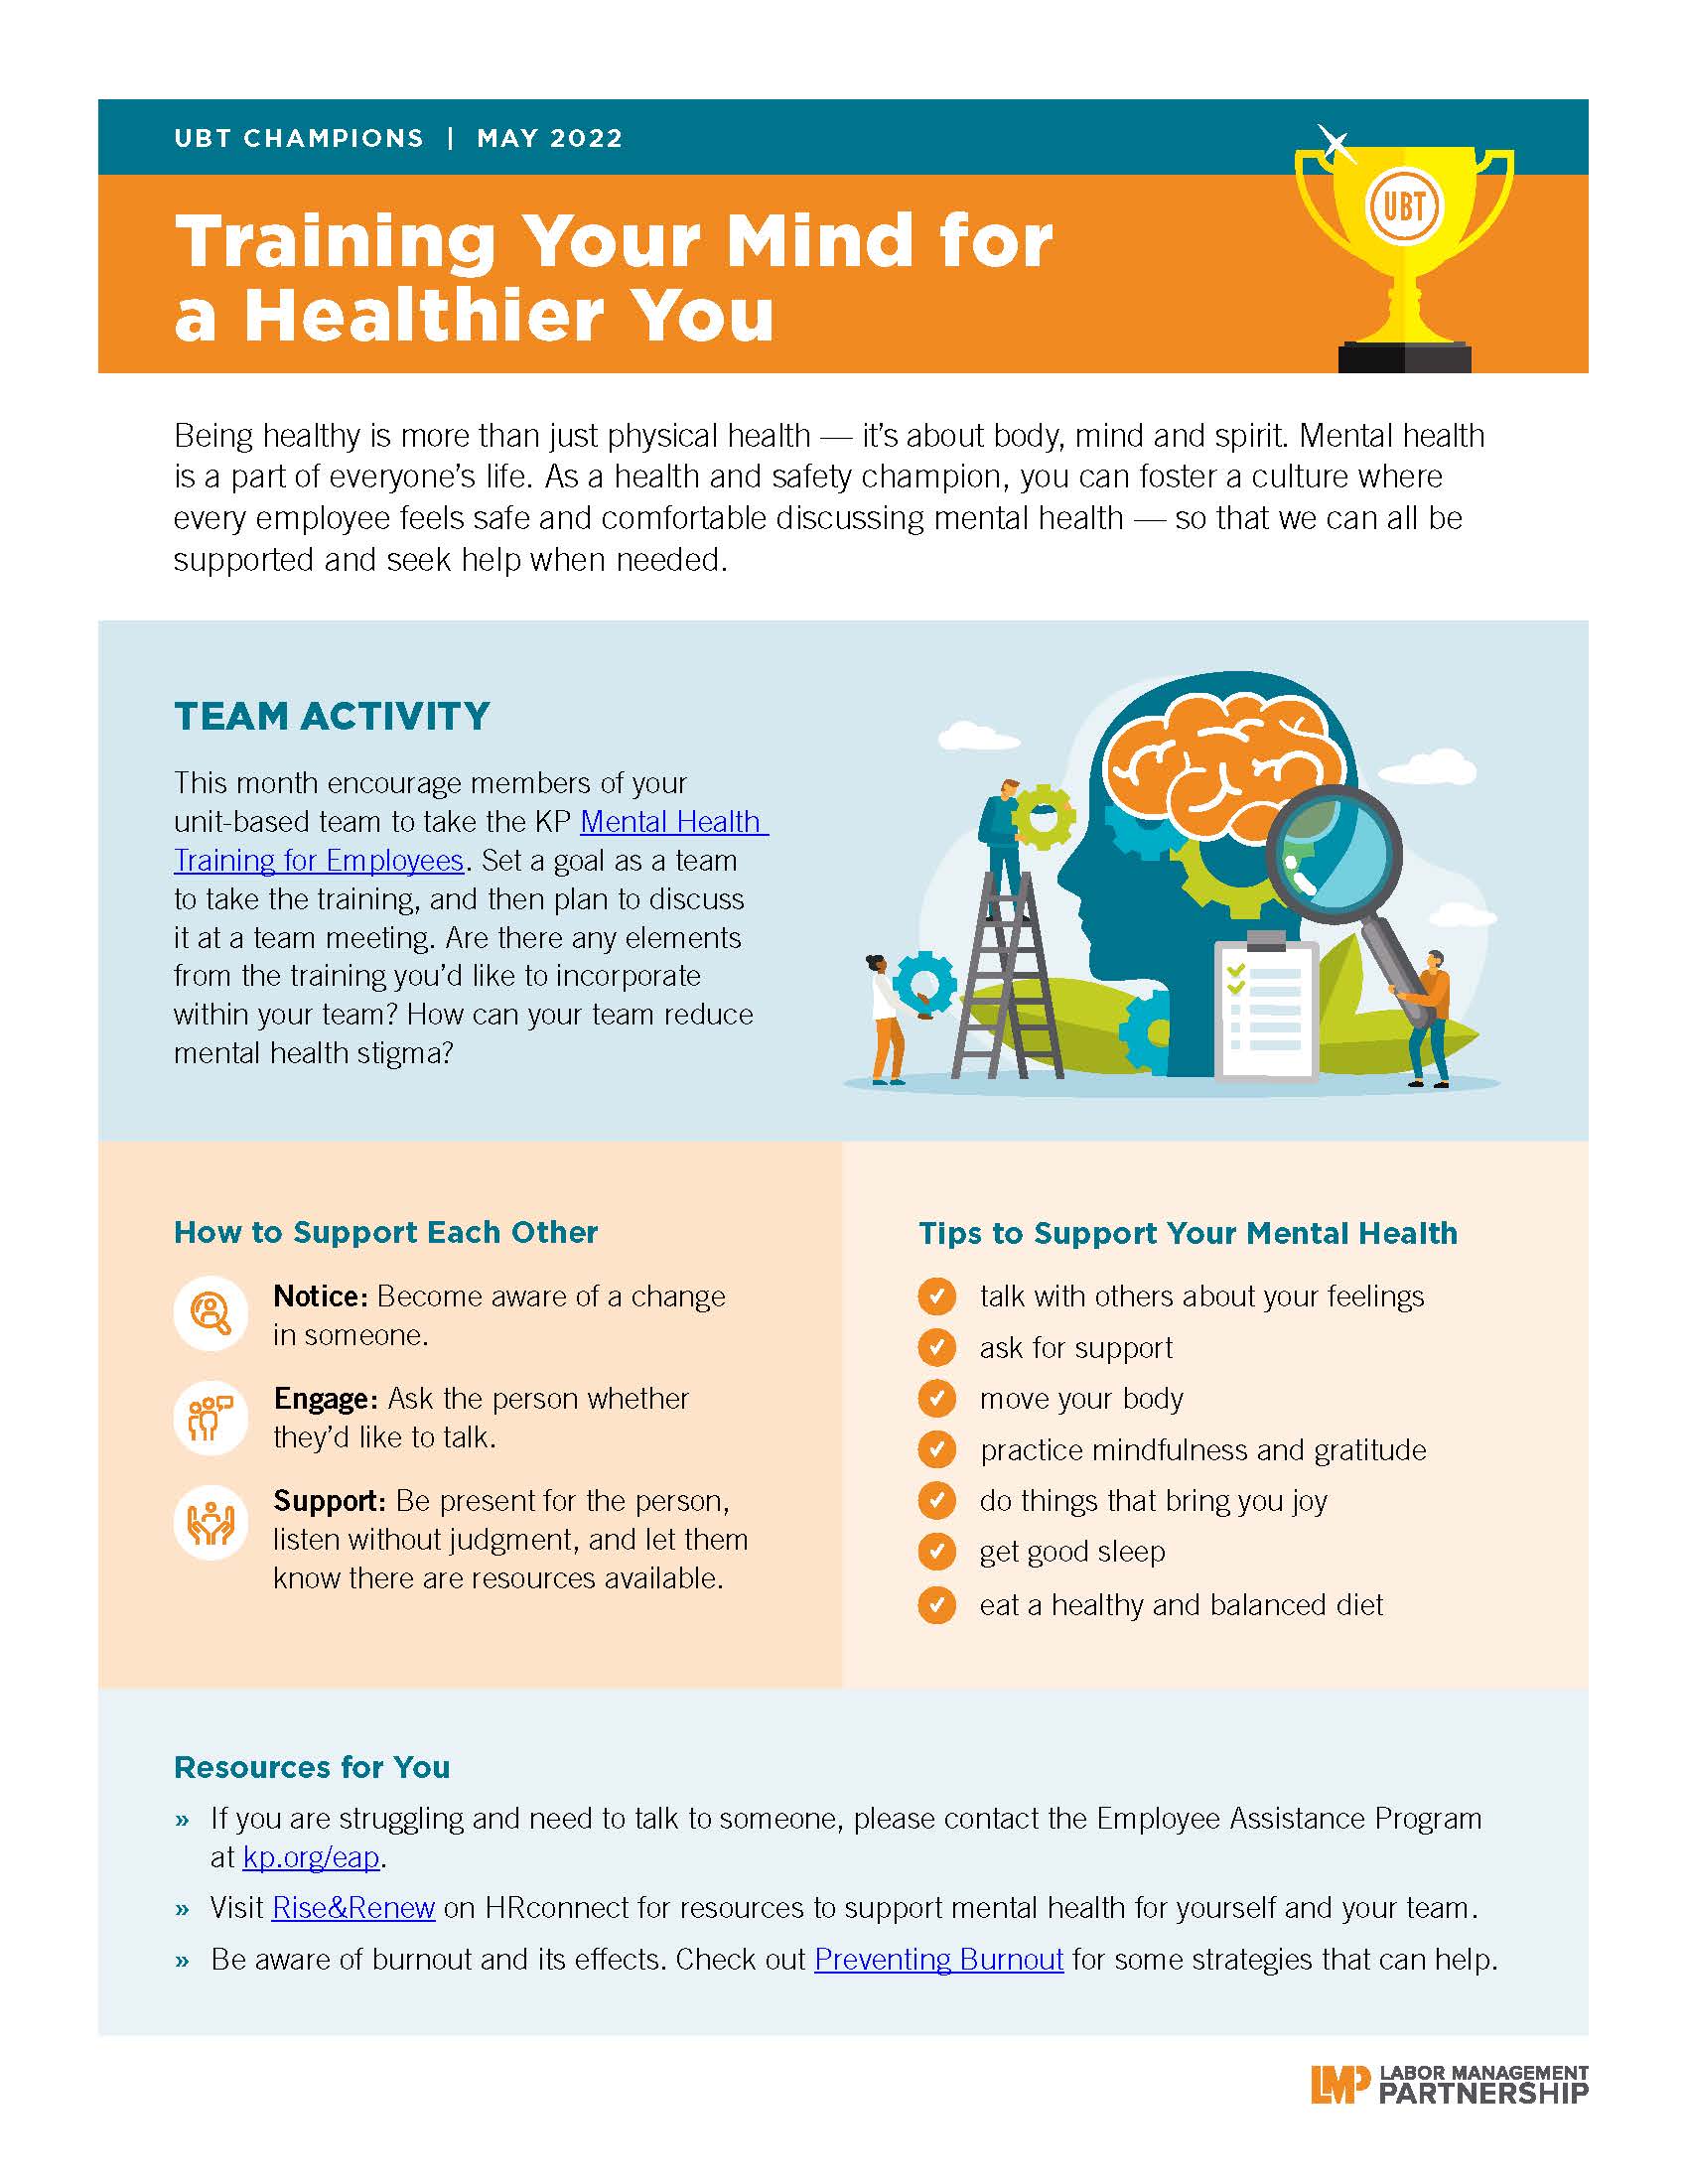 flier training your mind for healthier you includes team activity